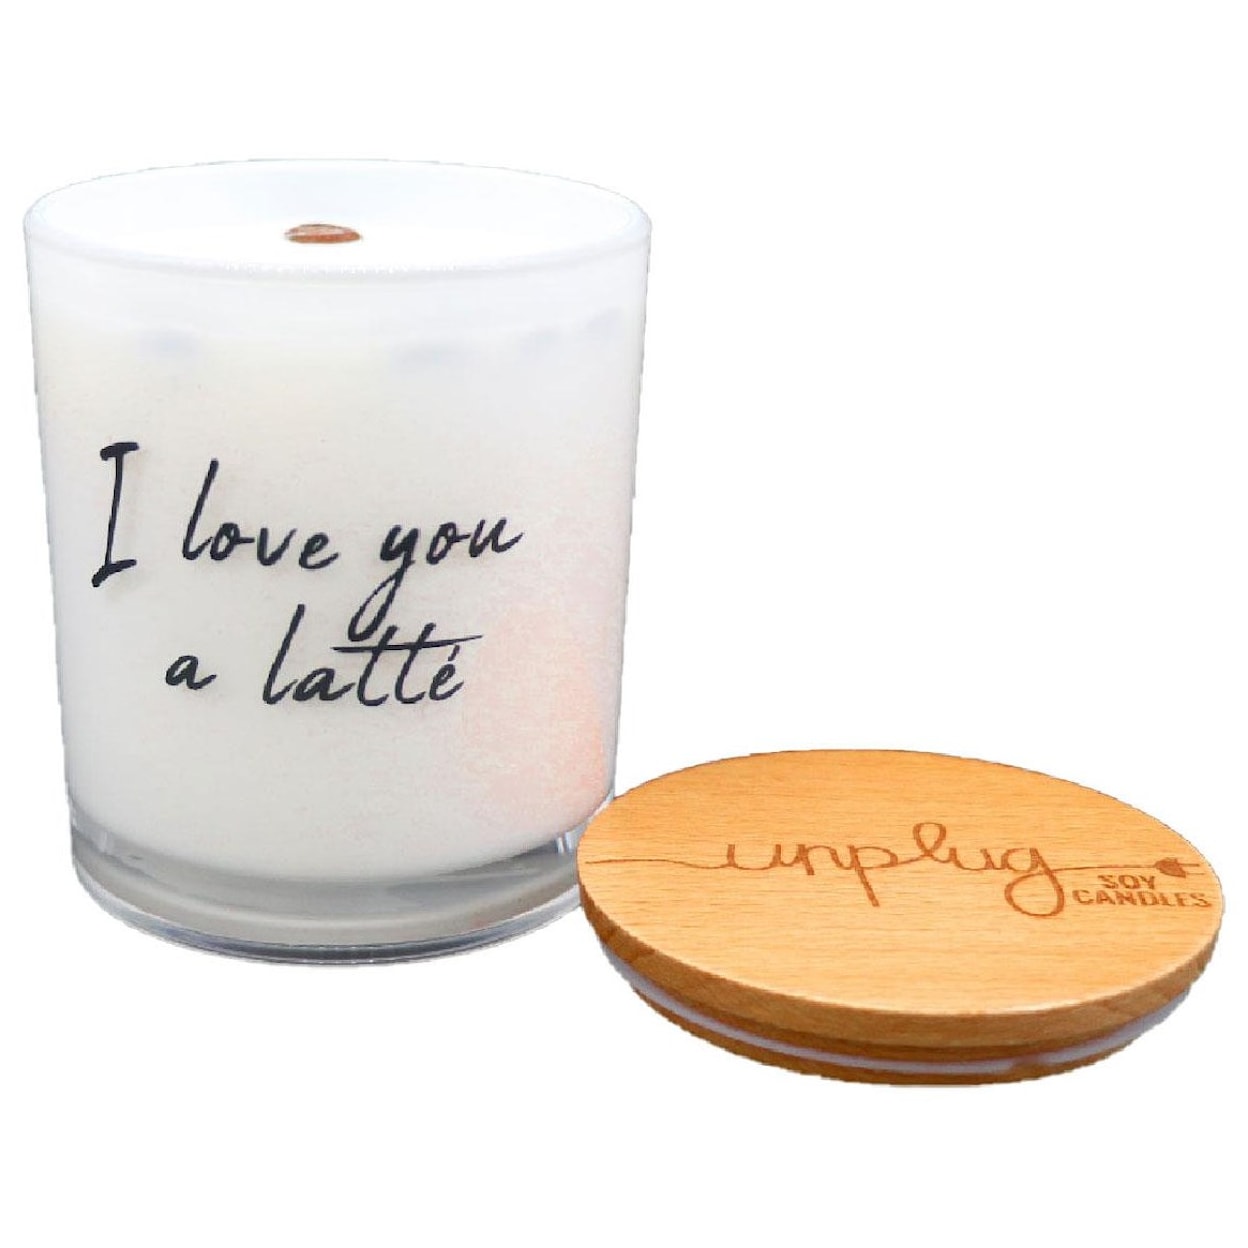 Unplug Soy Candles Signature Candles Candle